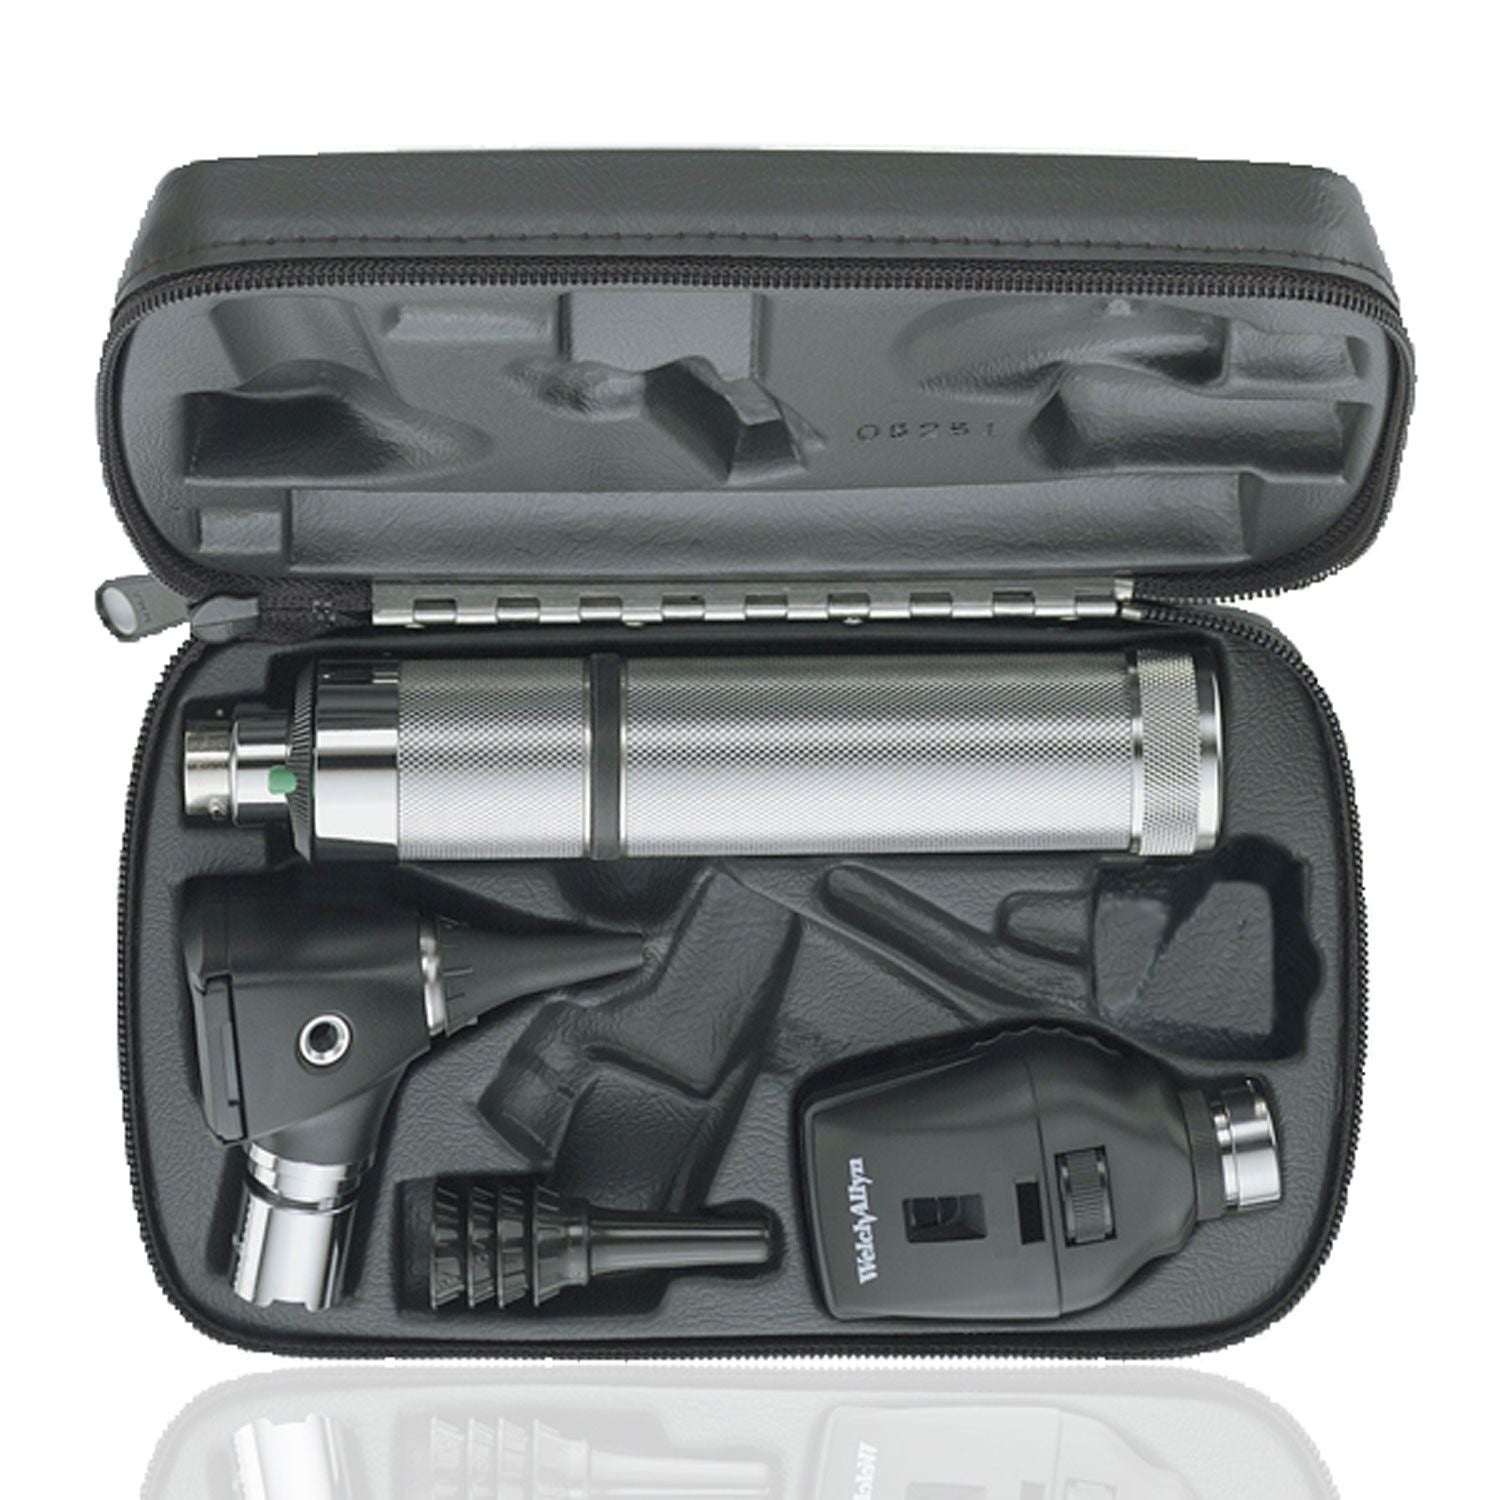 Welch Allyn Professional Diagnostic Set with C-cell Handle